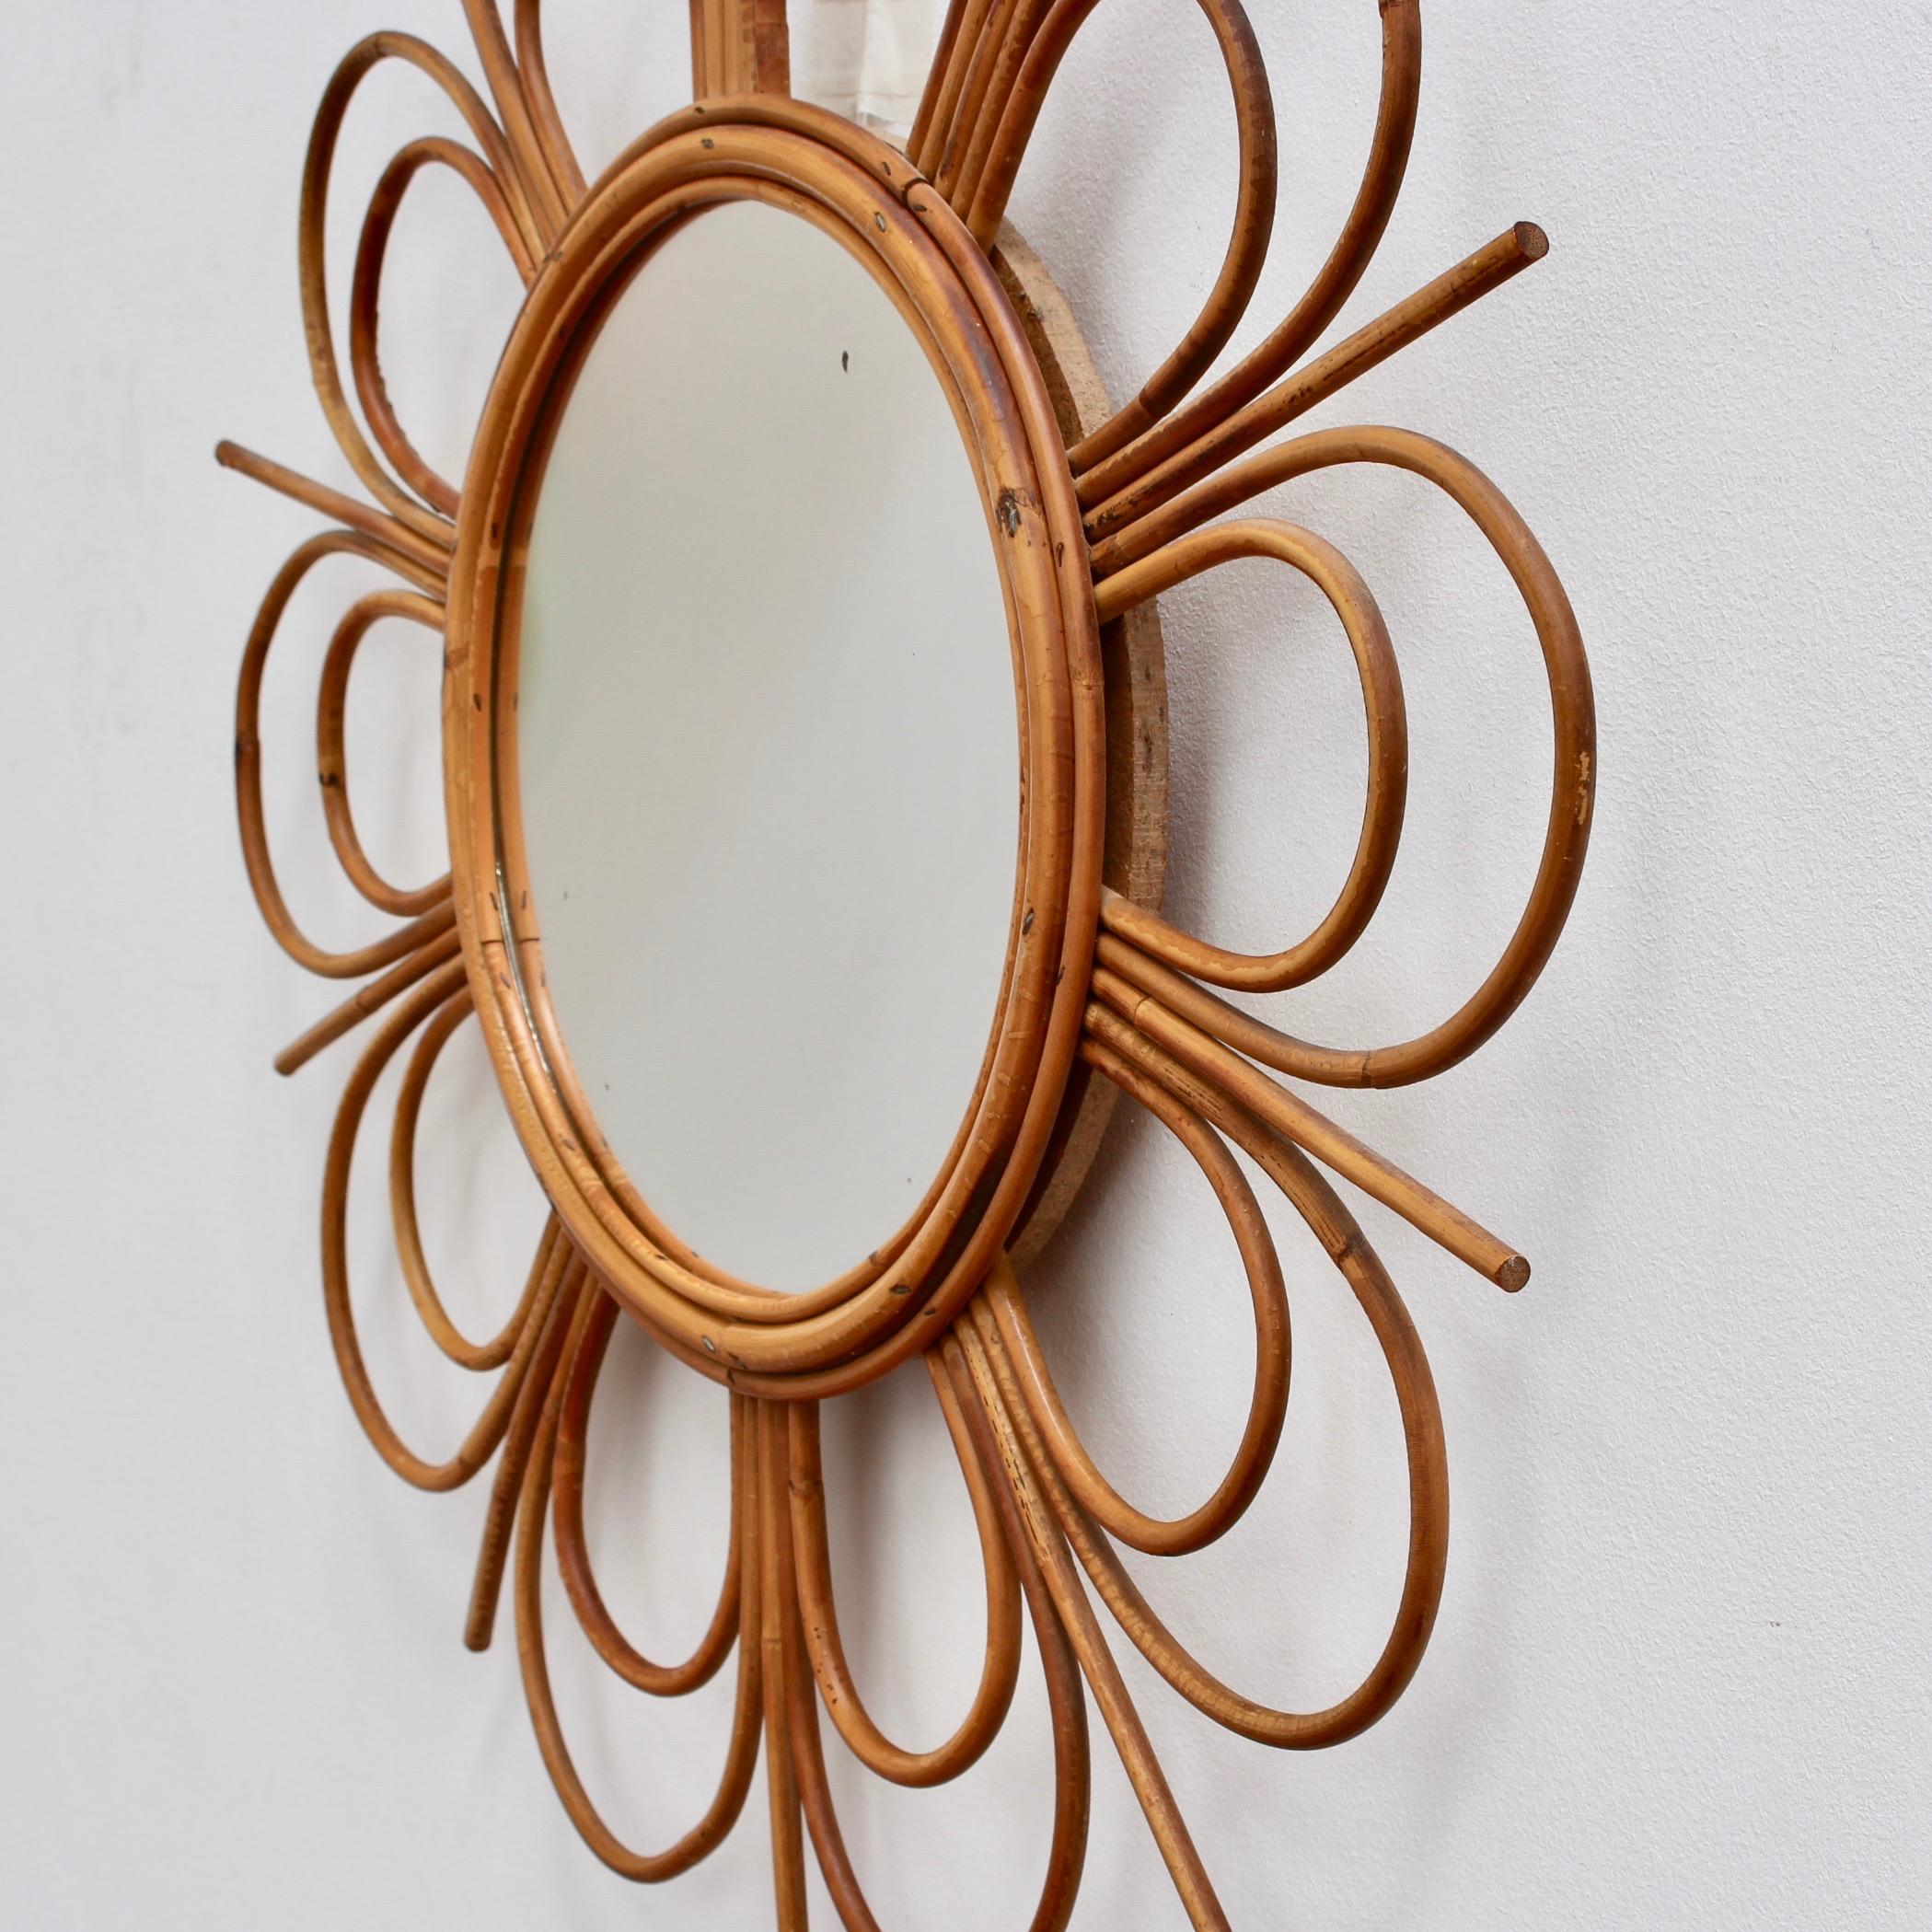 Midcentury French Rattan Flower-Shaped Wall Mirror, circa 1960s 4